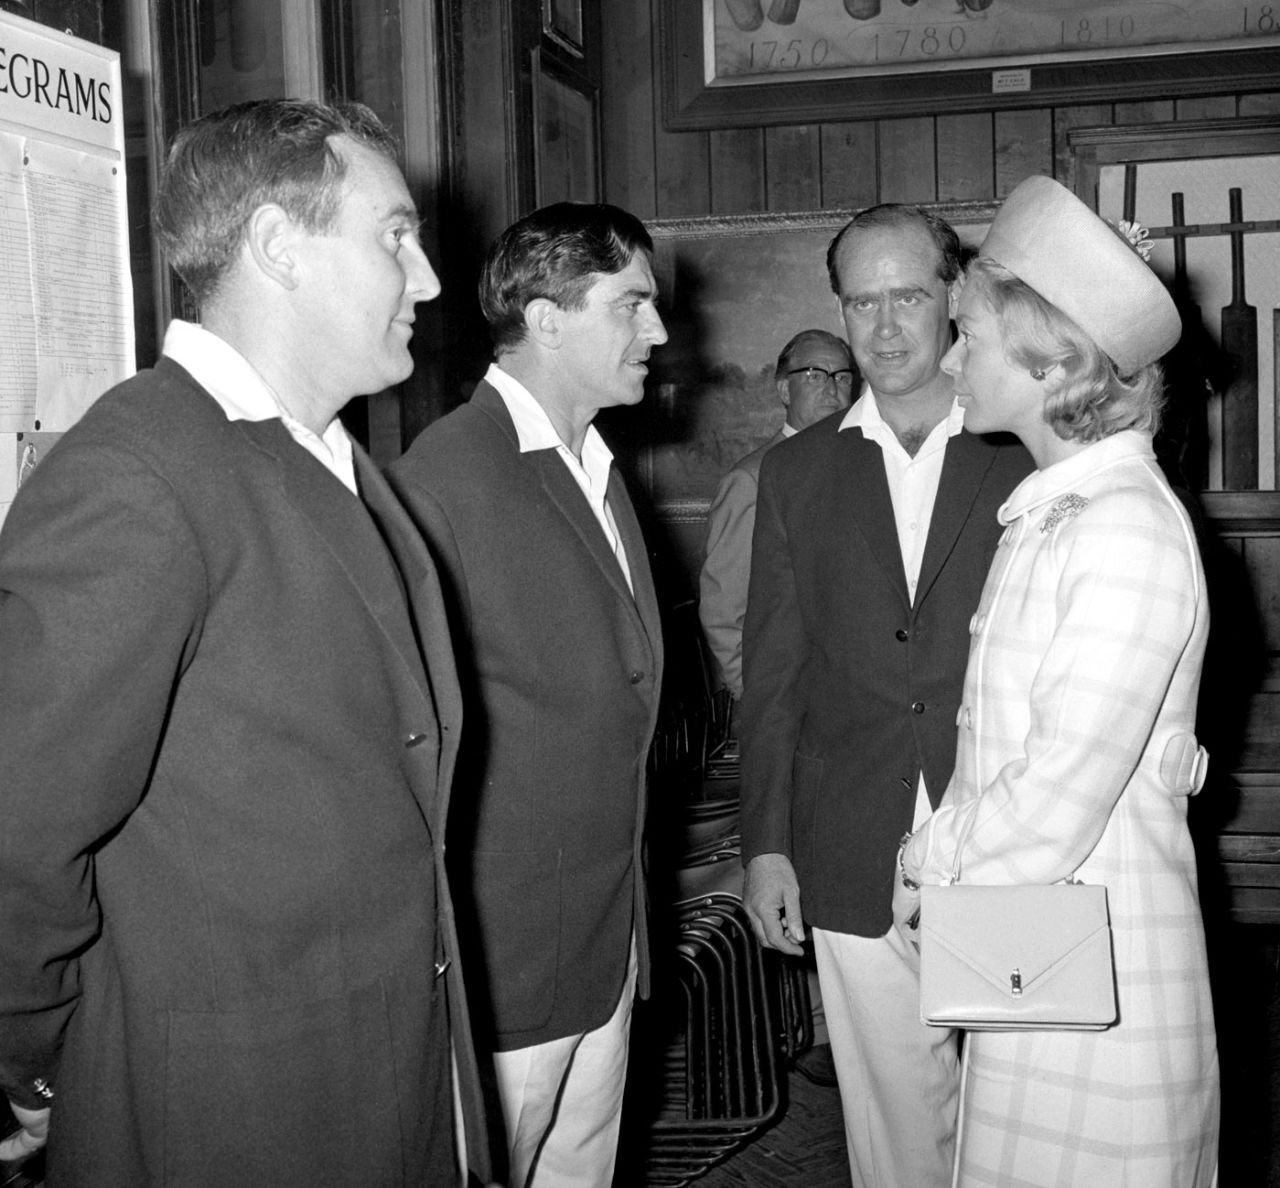 Ray Illingworth, Fred Trueman and Brian Close talk to the Duchess of Kent, Canterbury, August 1, 1968